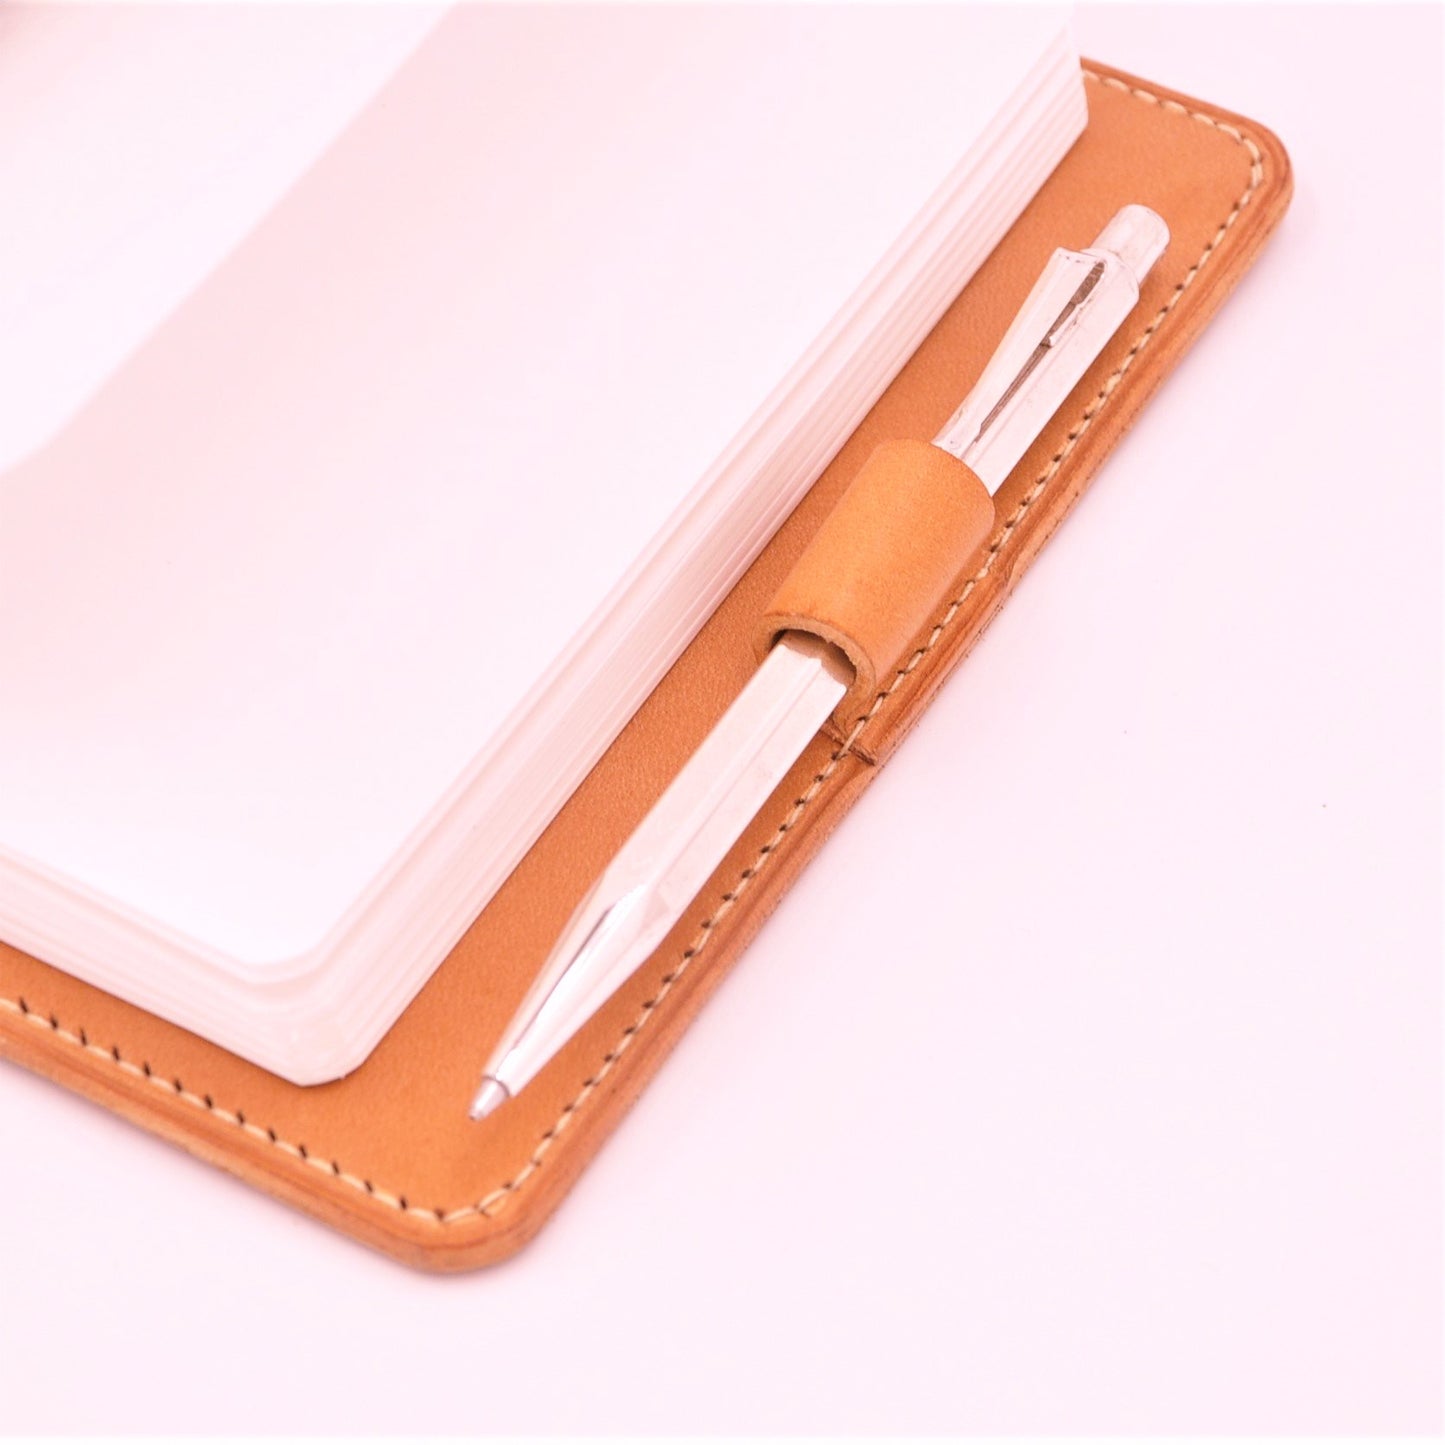 ROHE A6-P Leather Notebook Cover